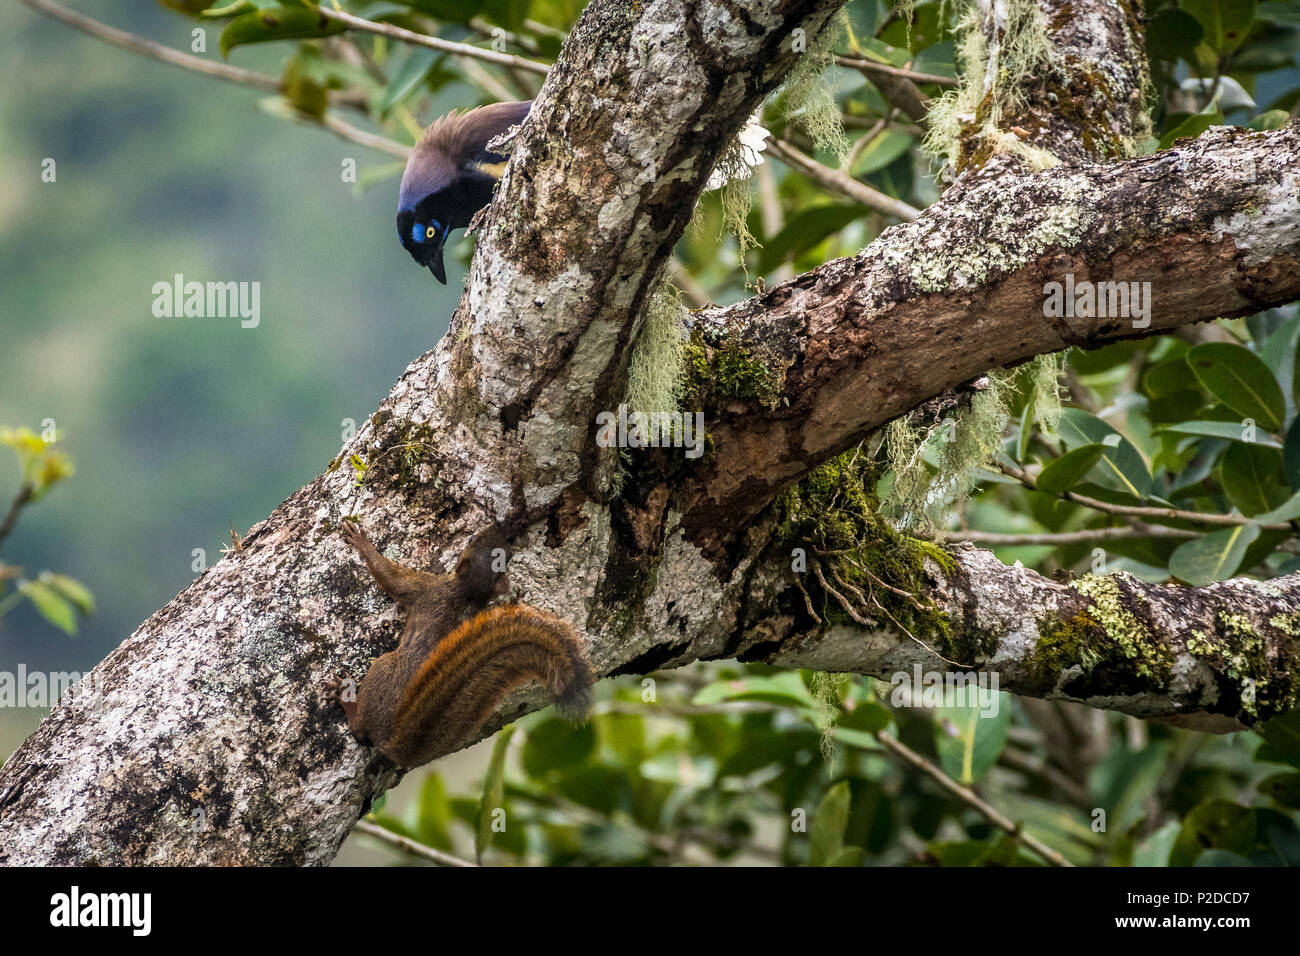 Black chested jay bird and red tailed squirrel in close encounter Stock Photo